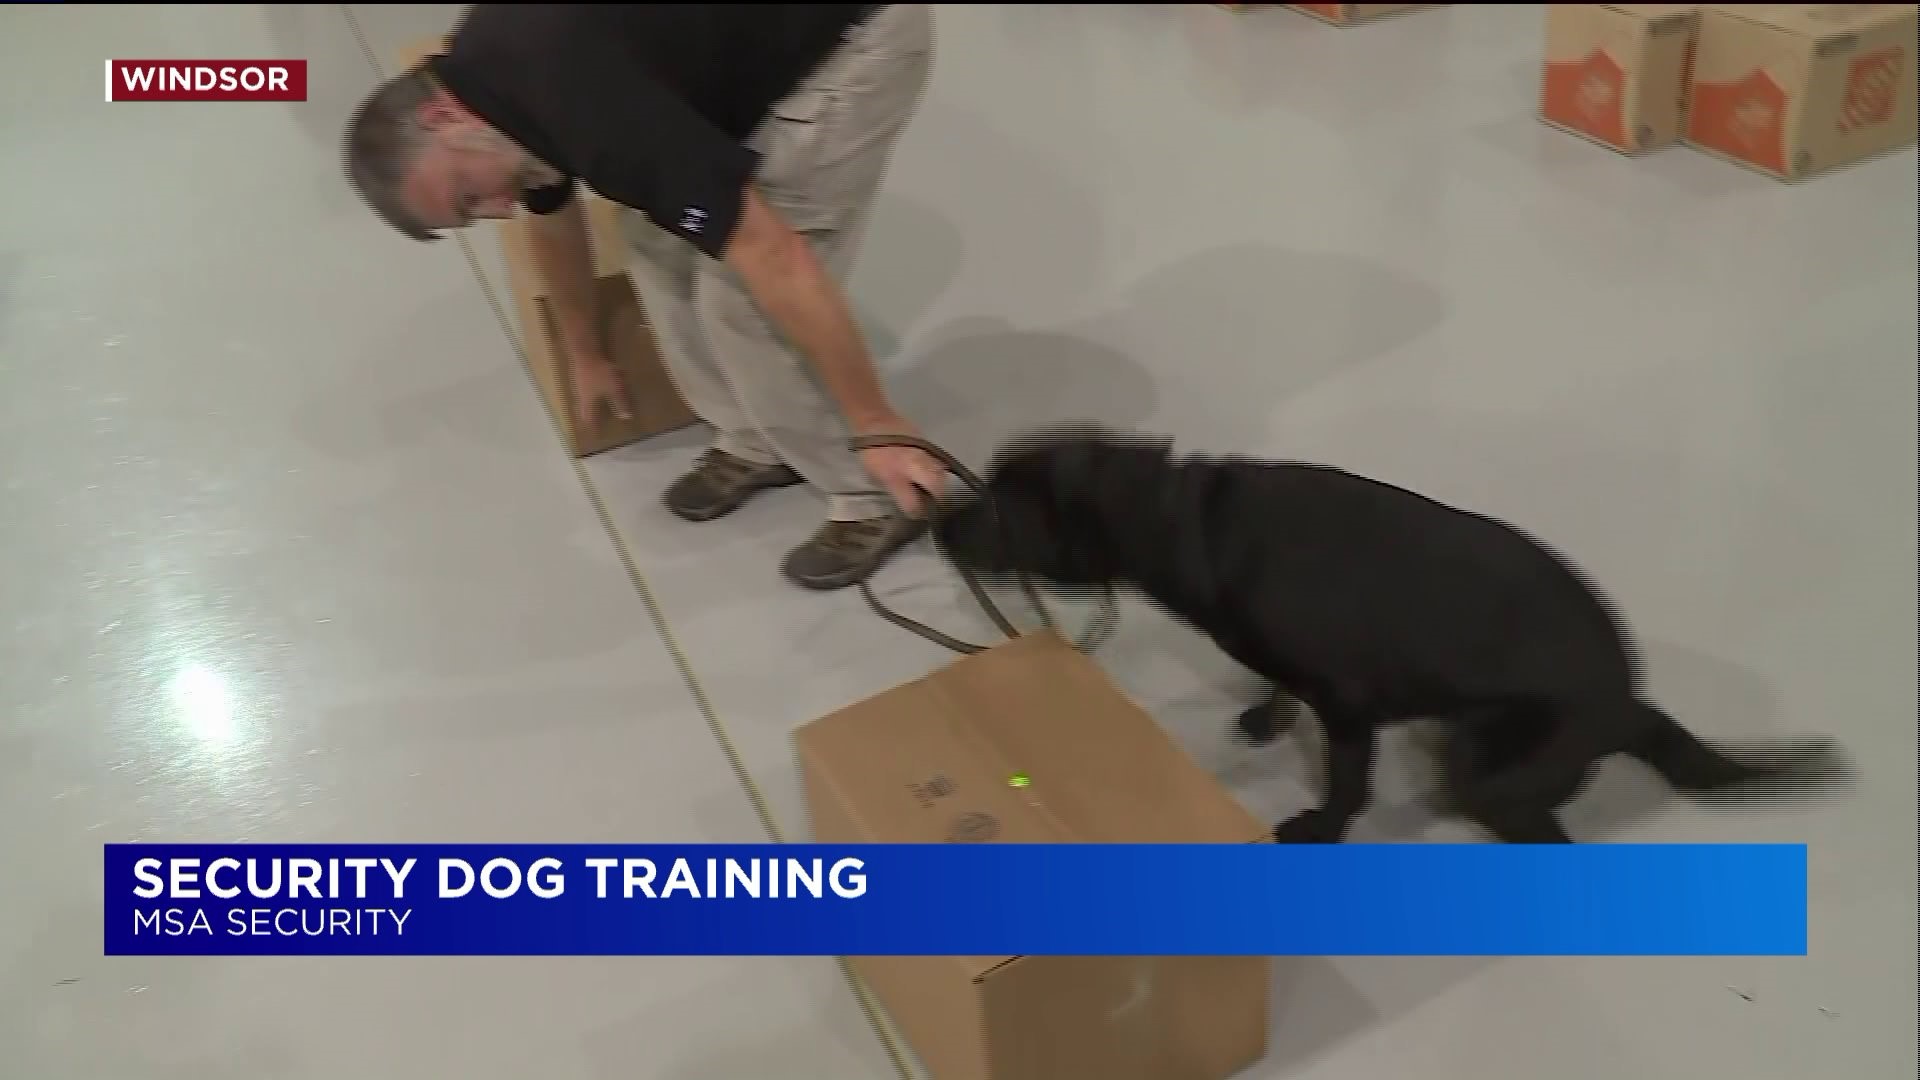 Training security dogs in Windsor